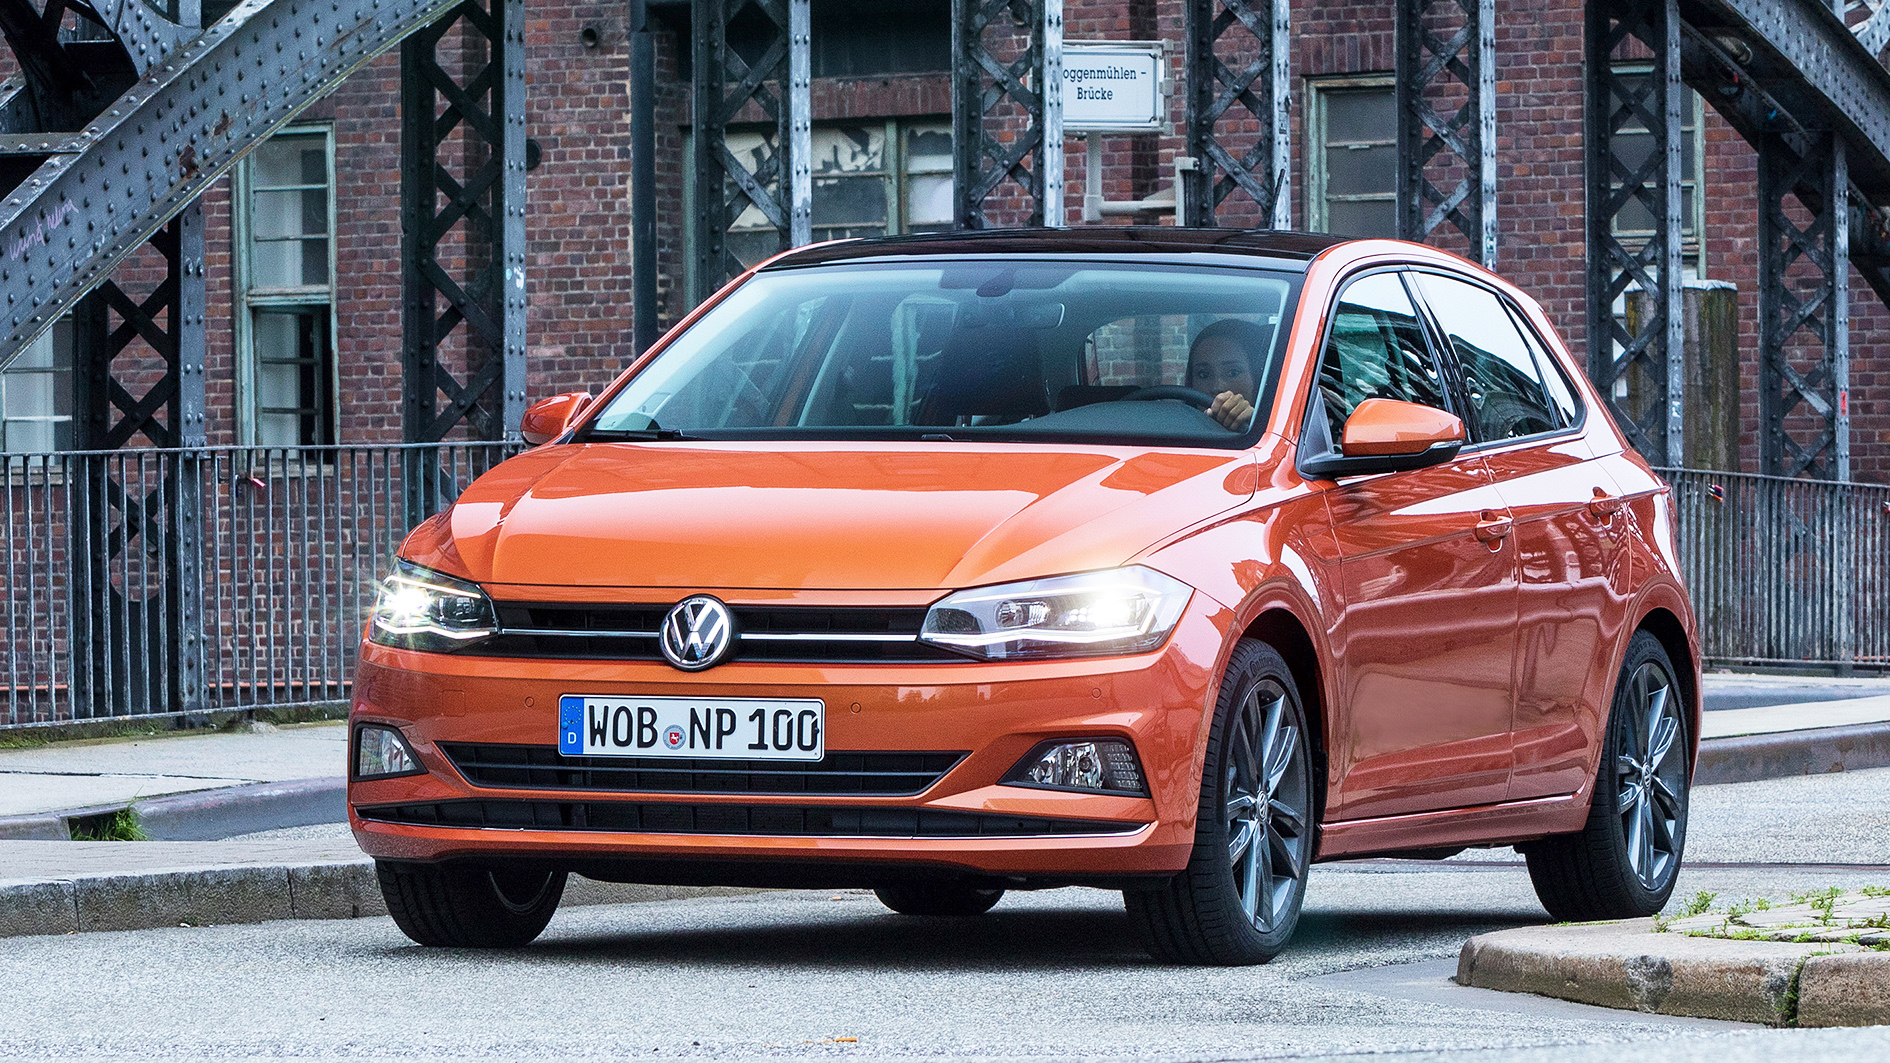 2018 Vw Polo 10 Tsi Review And Test Drive With The 6th Generation Of The